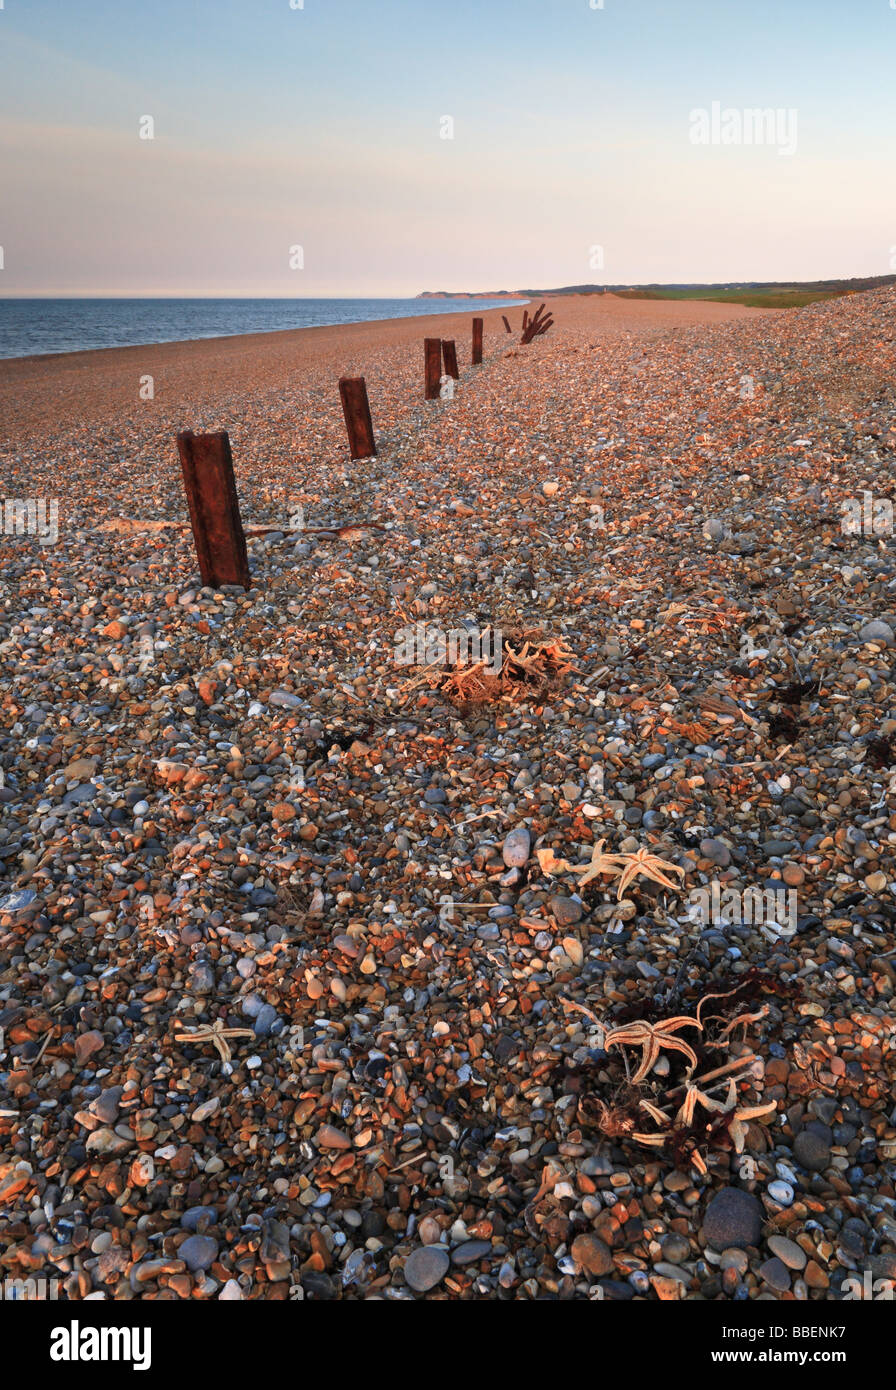 Salthouse shingle beach looking towards Weybourne with rusting sea defences and starfish Stock Photo